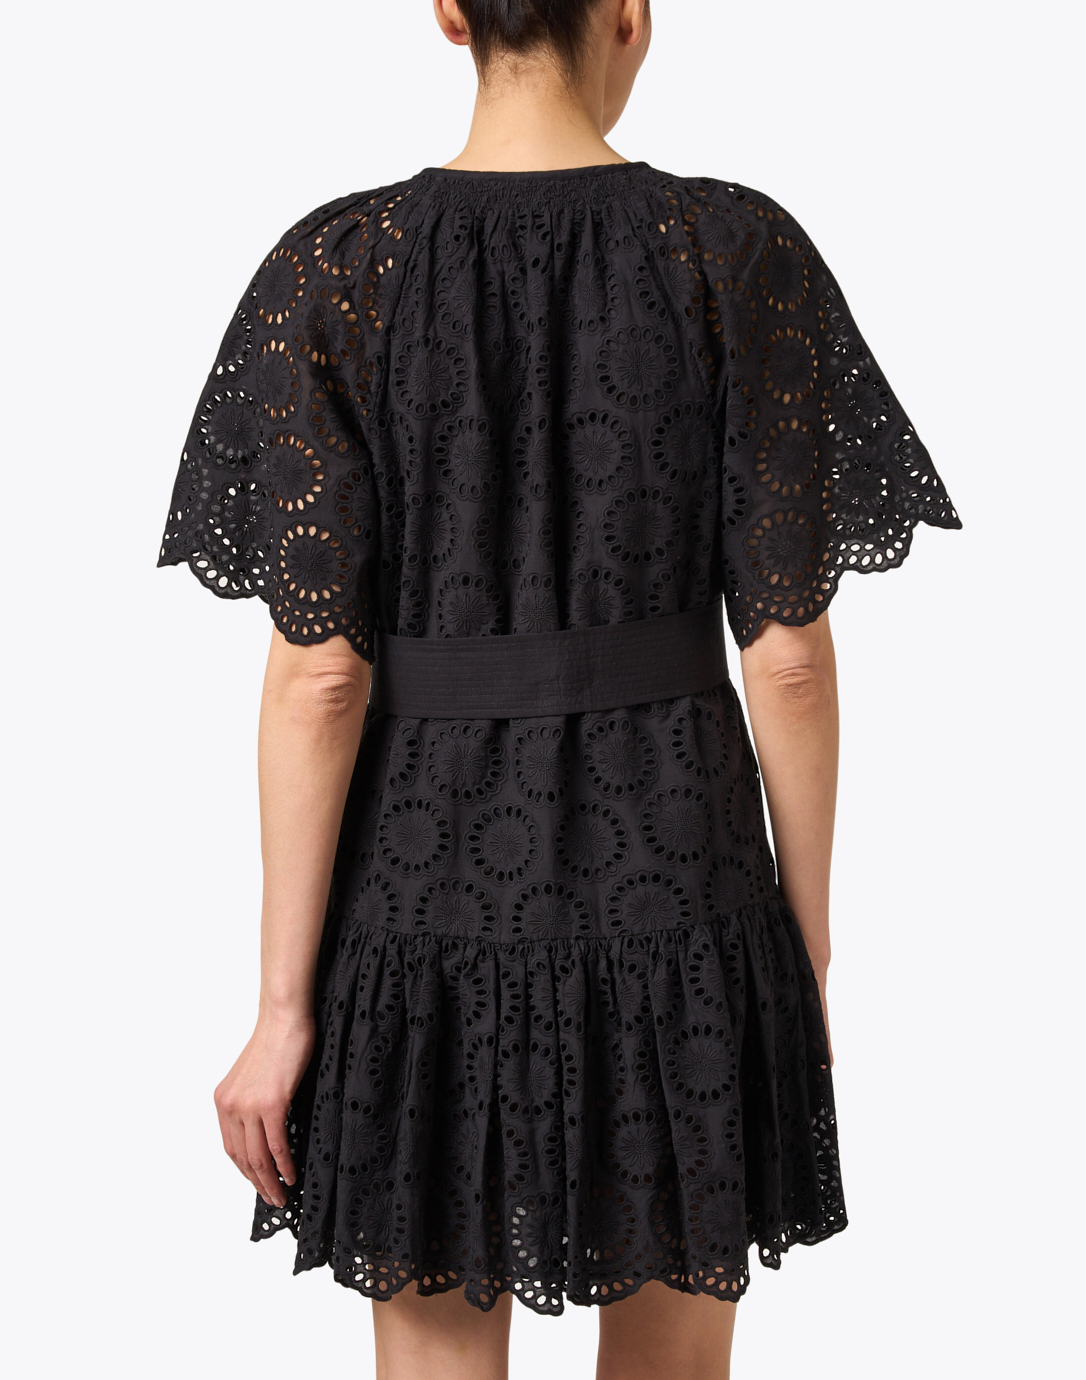 Paisley Floral Stretch Lace - Black - Fabric by the Yard